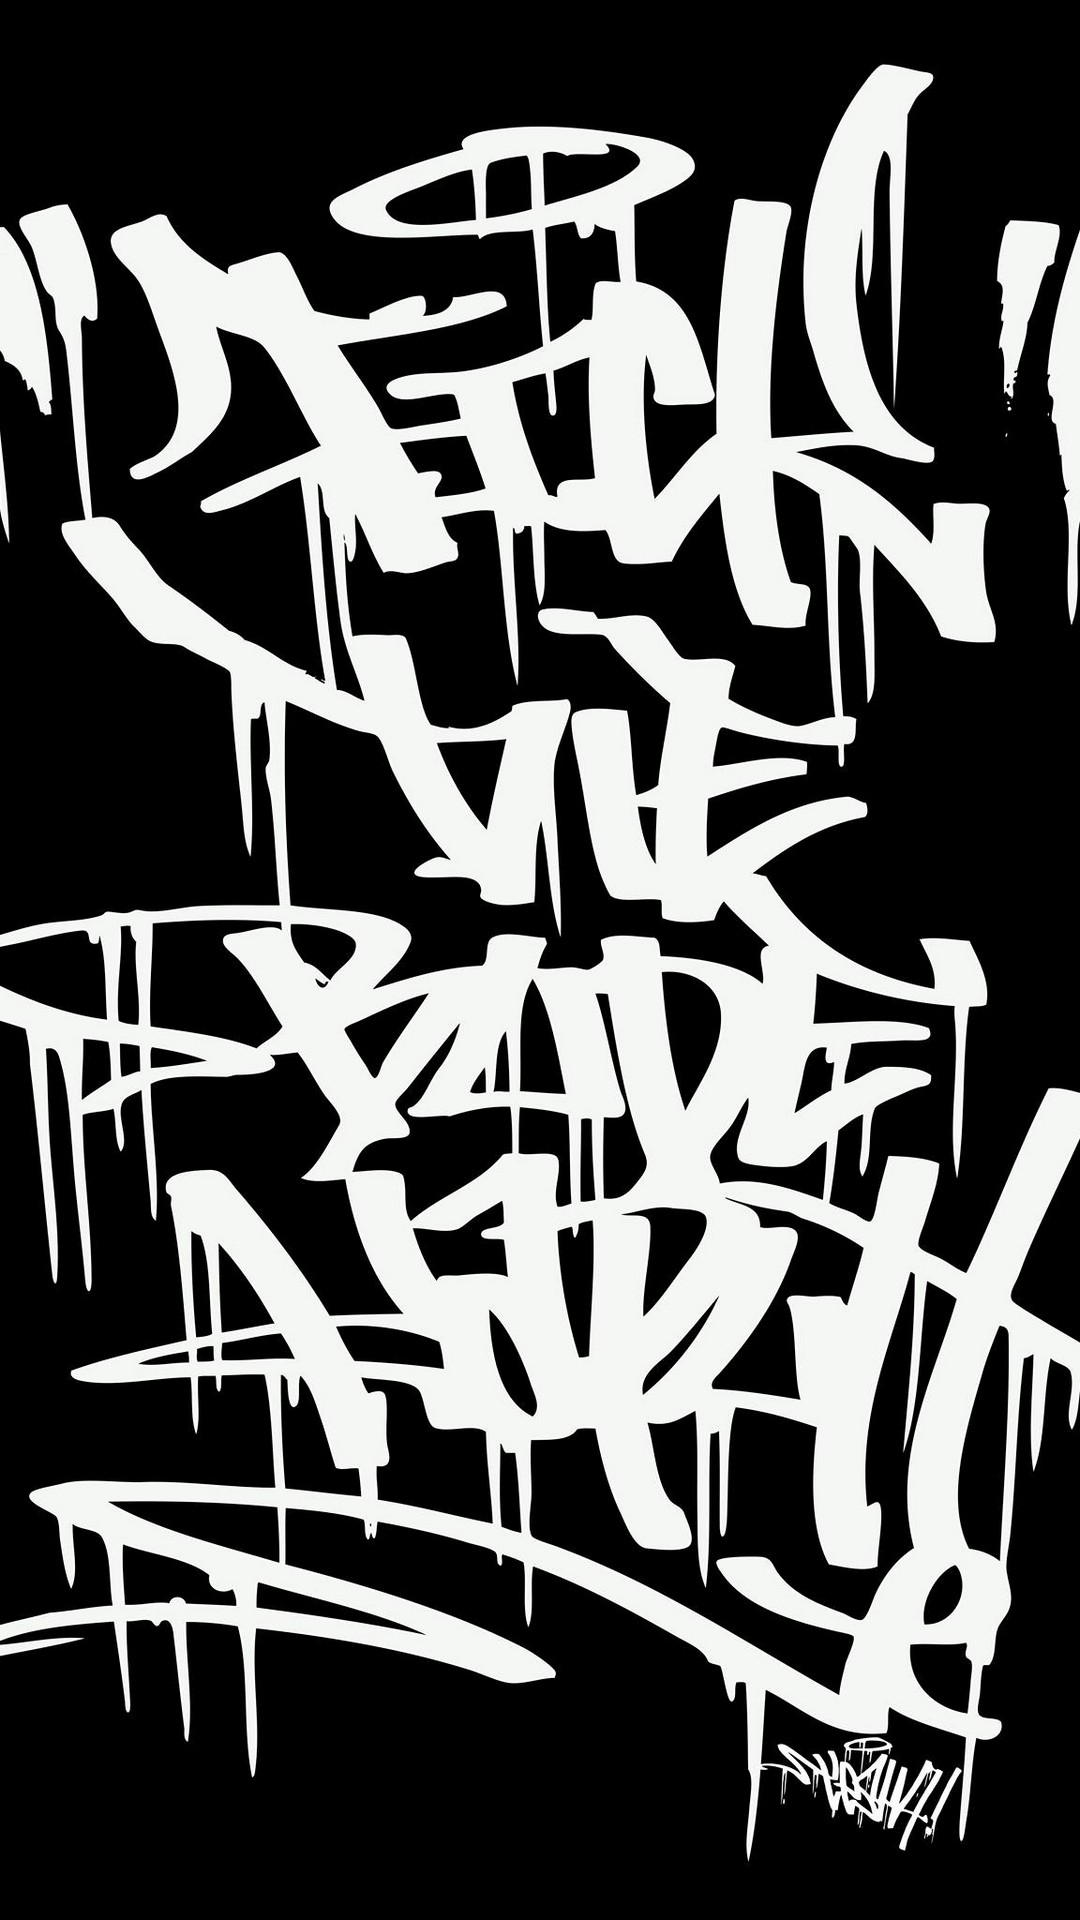 Mobile Wallpapers Graffiti Letters with image resolution 1080x1920 pixel. You can make this wallpaper for your iPhone 5, 6, 7, 8, X backgrounds, Mobile Screensaver, or iPad Lock Screen